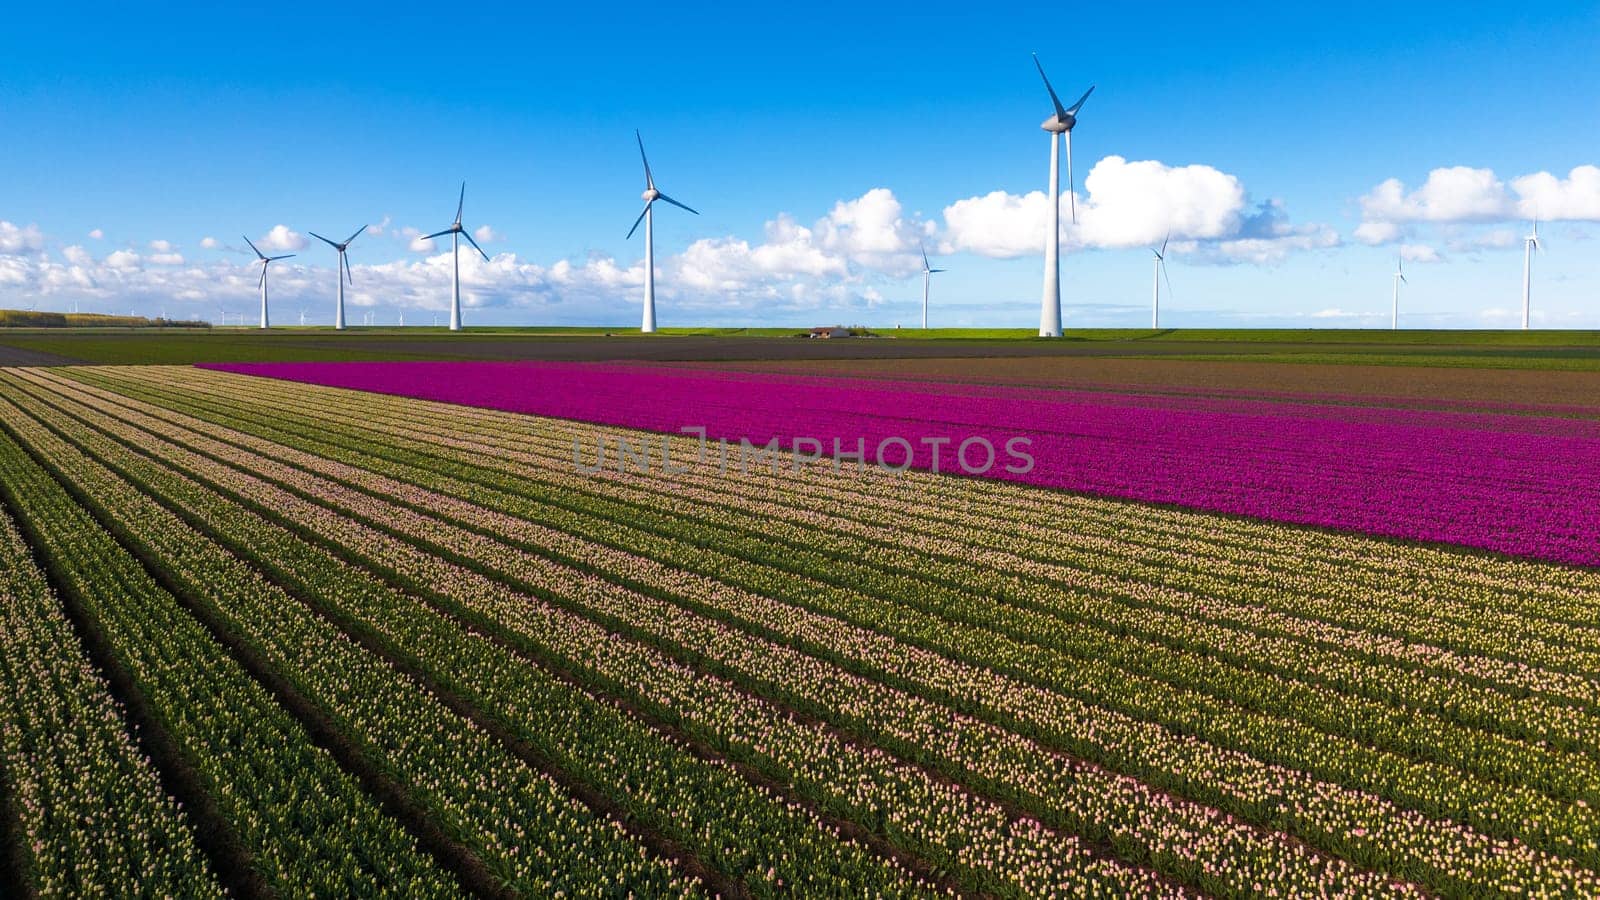 A picturesque scene of a vibrant field filled with colorful flowers, with elegant windmill turbines spinning in the distance against a clear blue sky by fokkebok